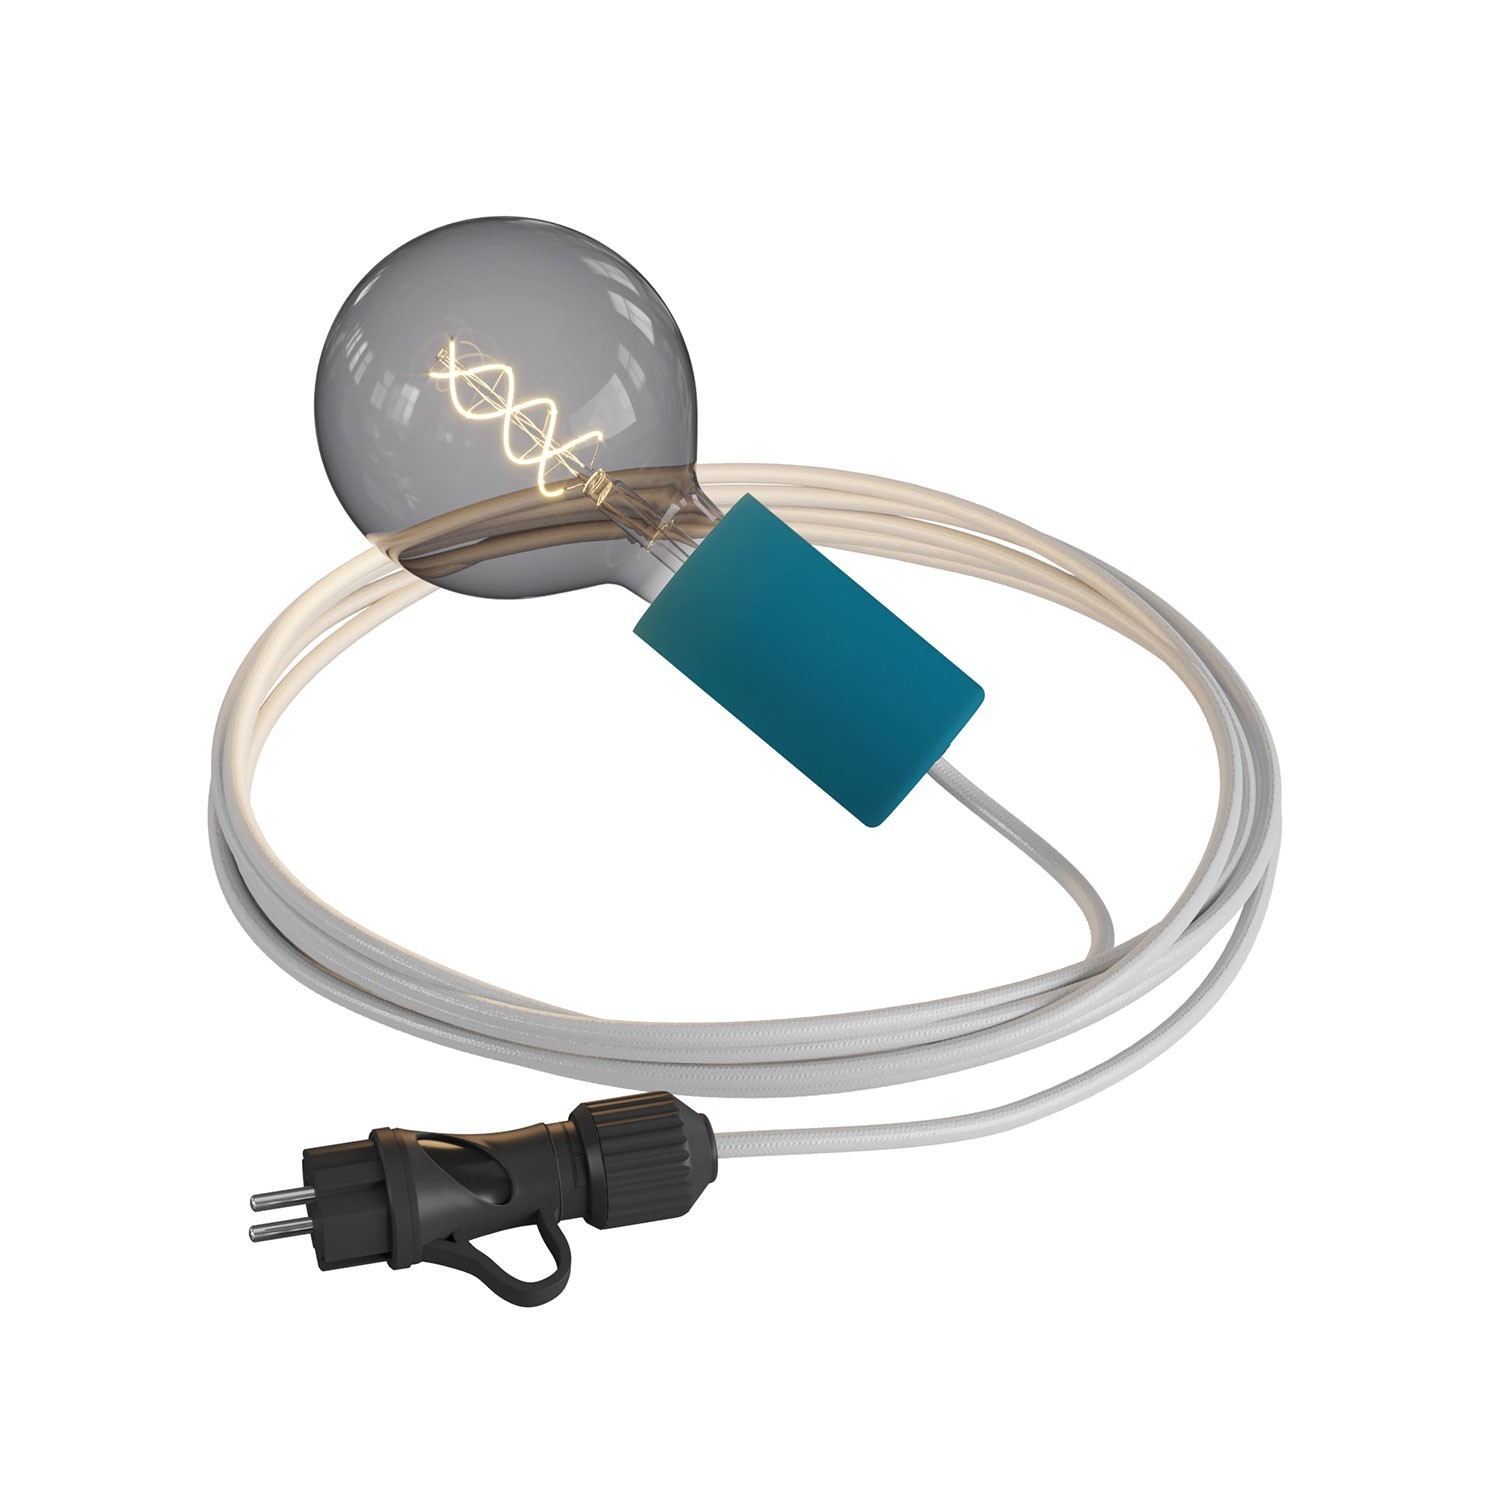 Eiva Snake Elegant, portable outdoor lamp, 5 m fabric cable, IP65 waterproof lamp holder and plug